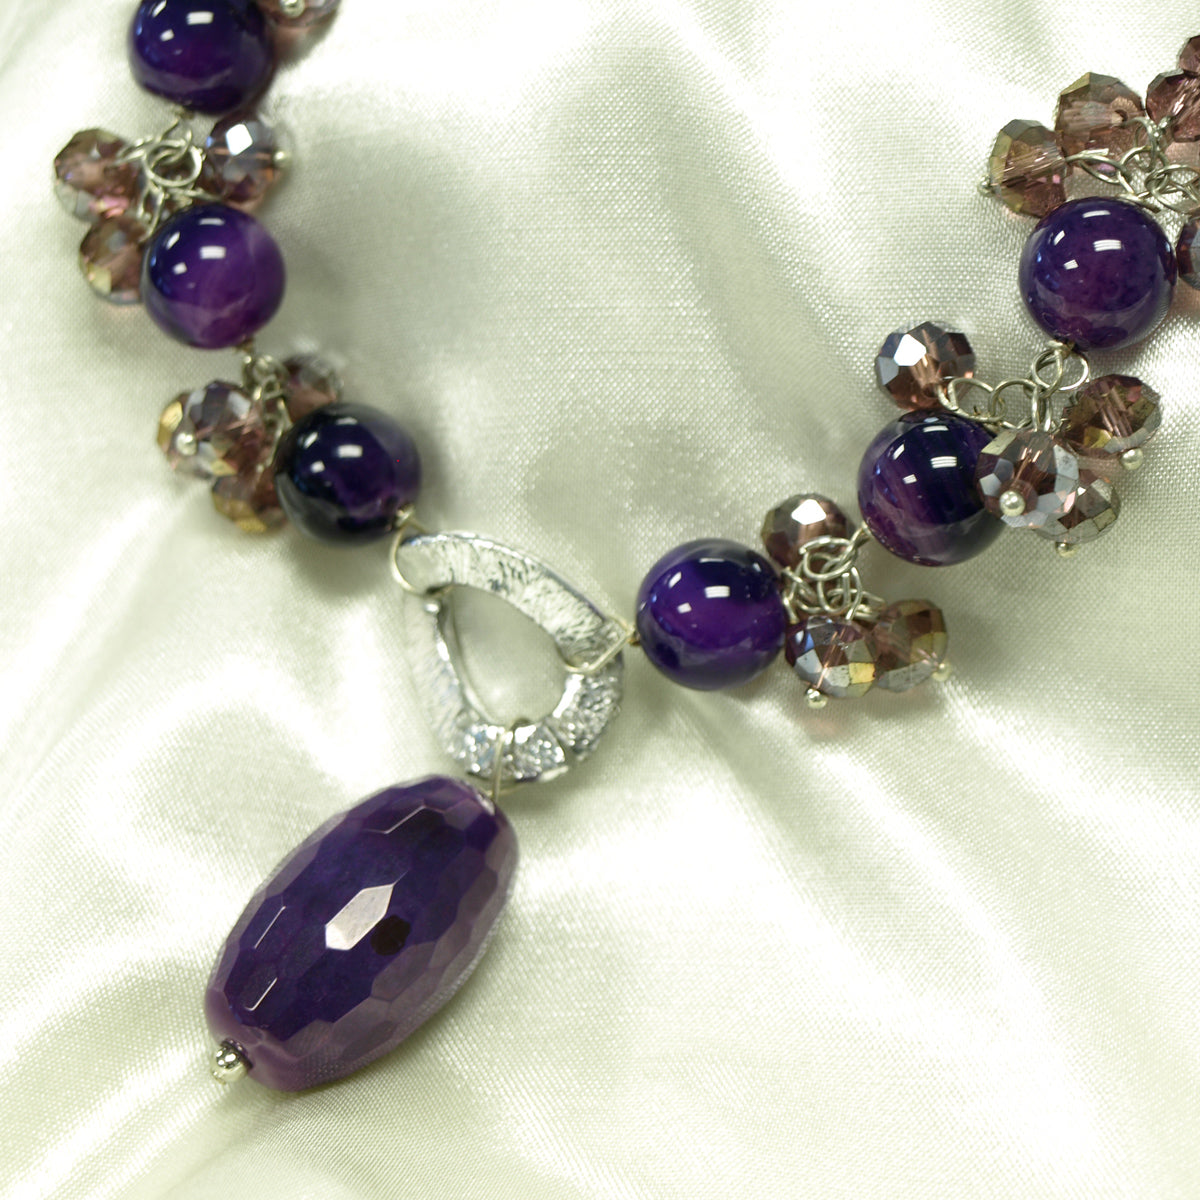 Purple Crystal and Agate Pendant Necklace, 19.5 inches